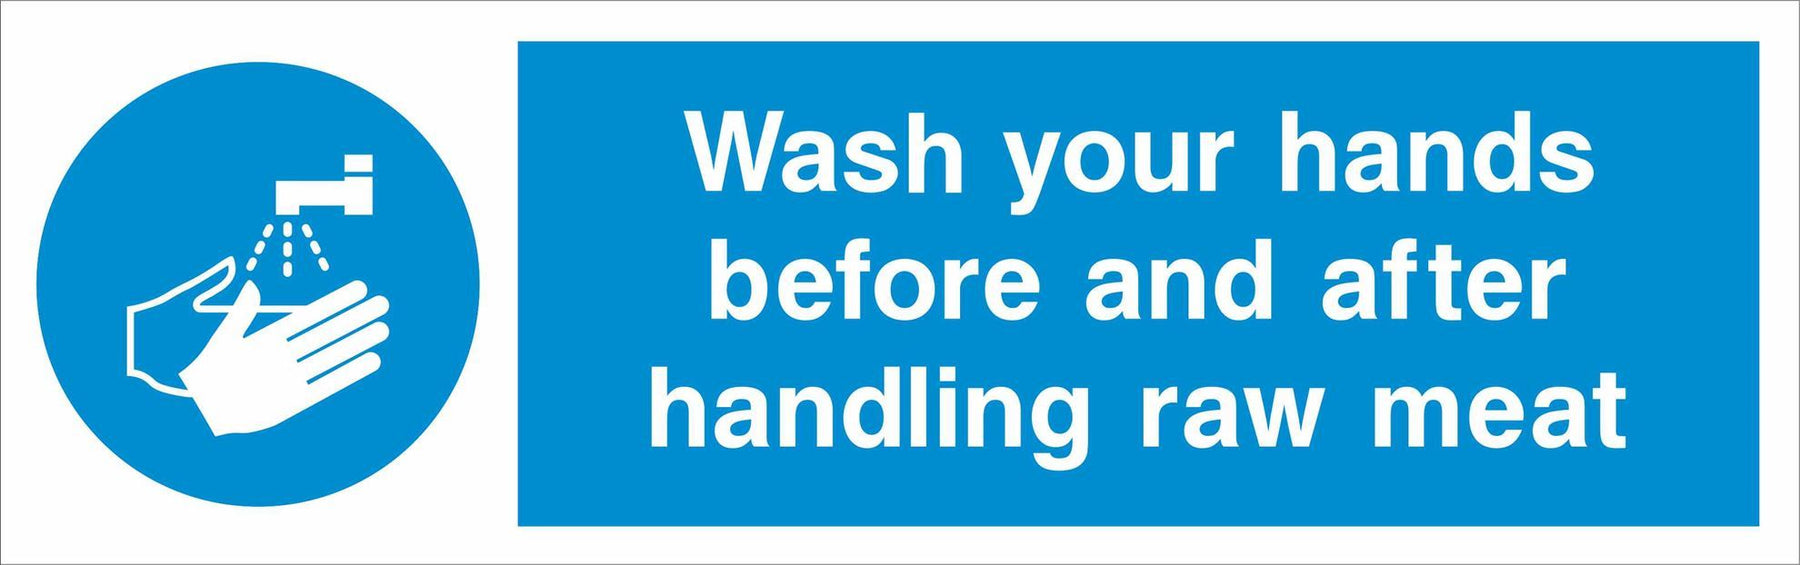 Wash your hands before and after handling raw meat